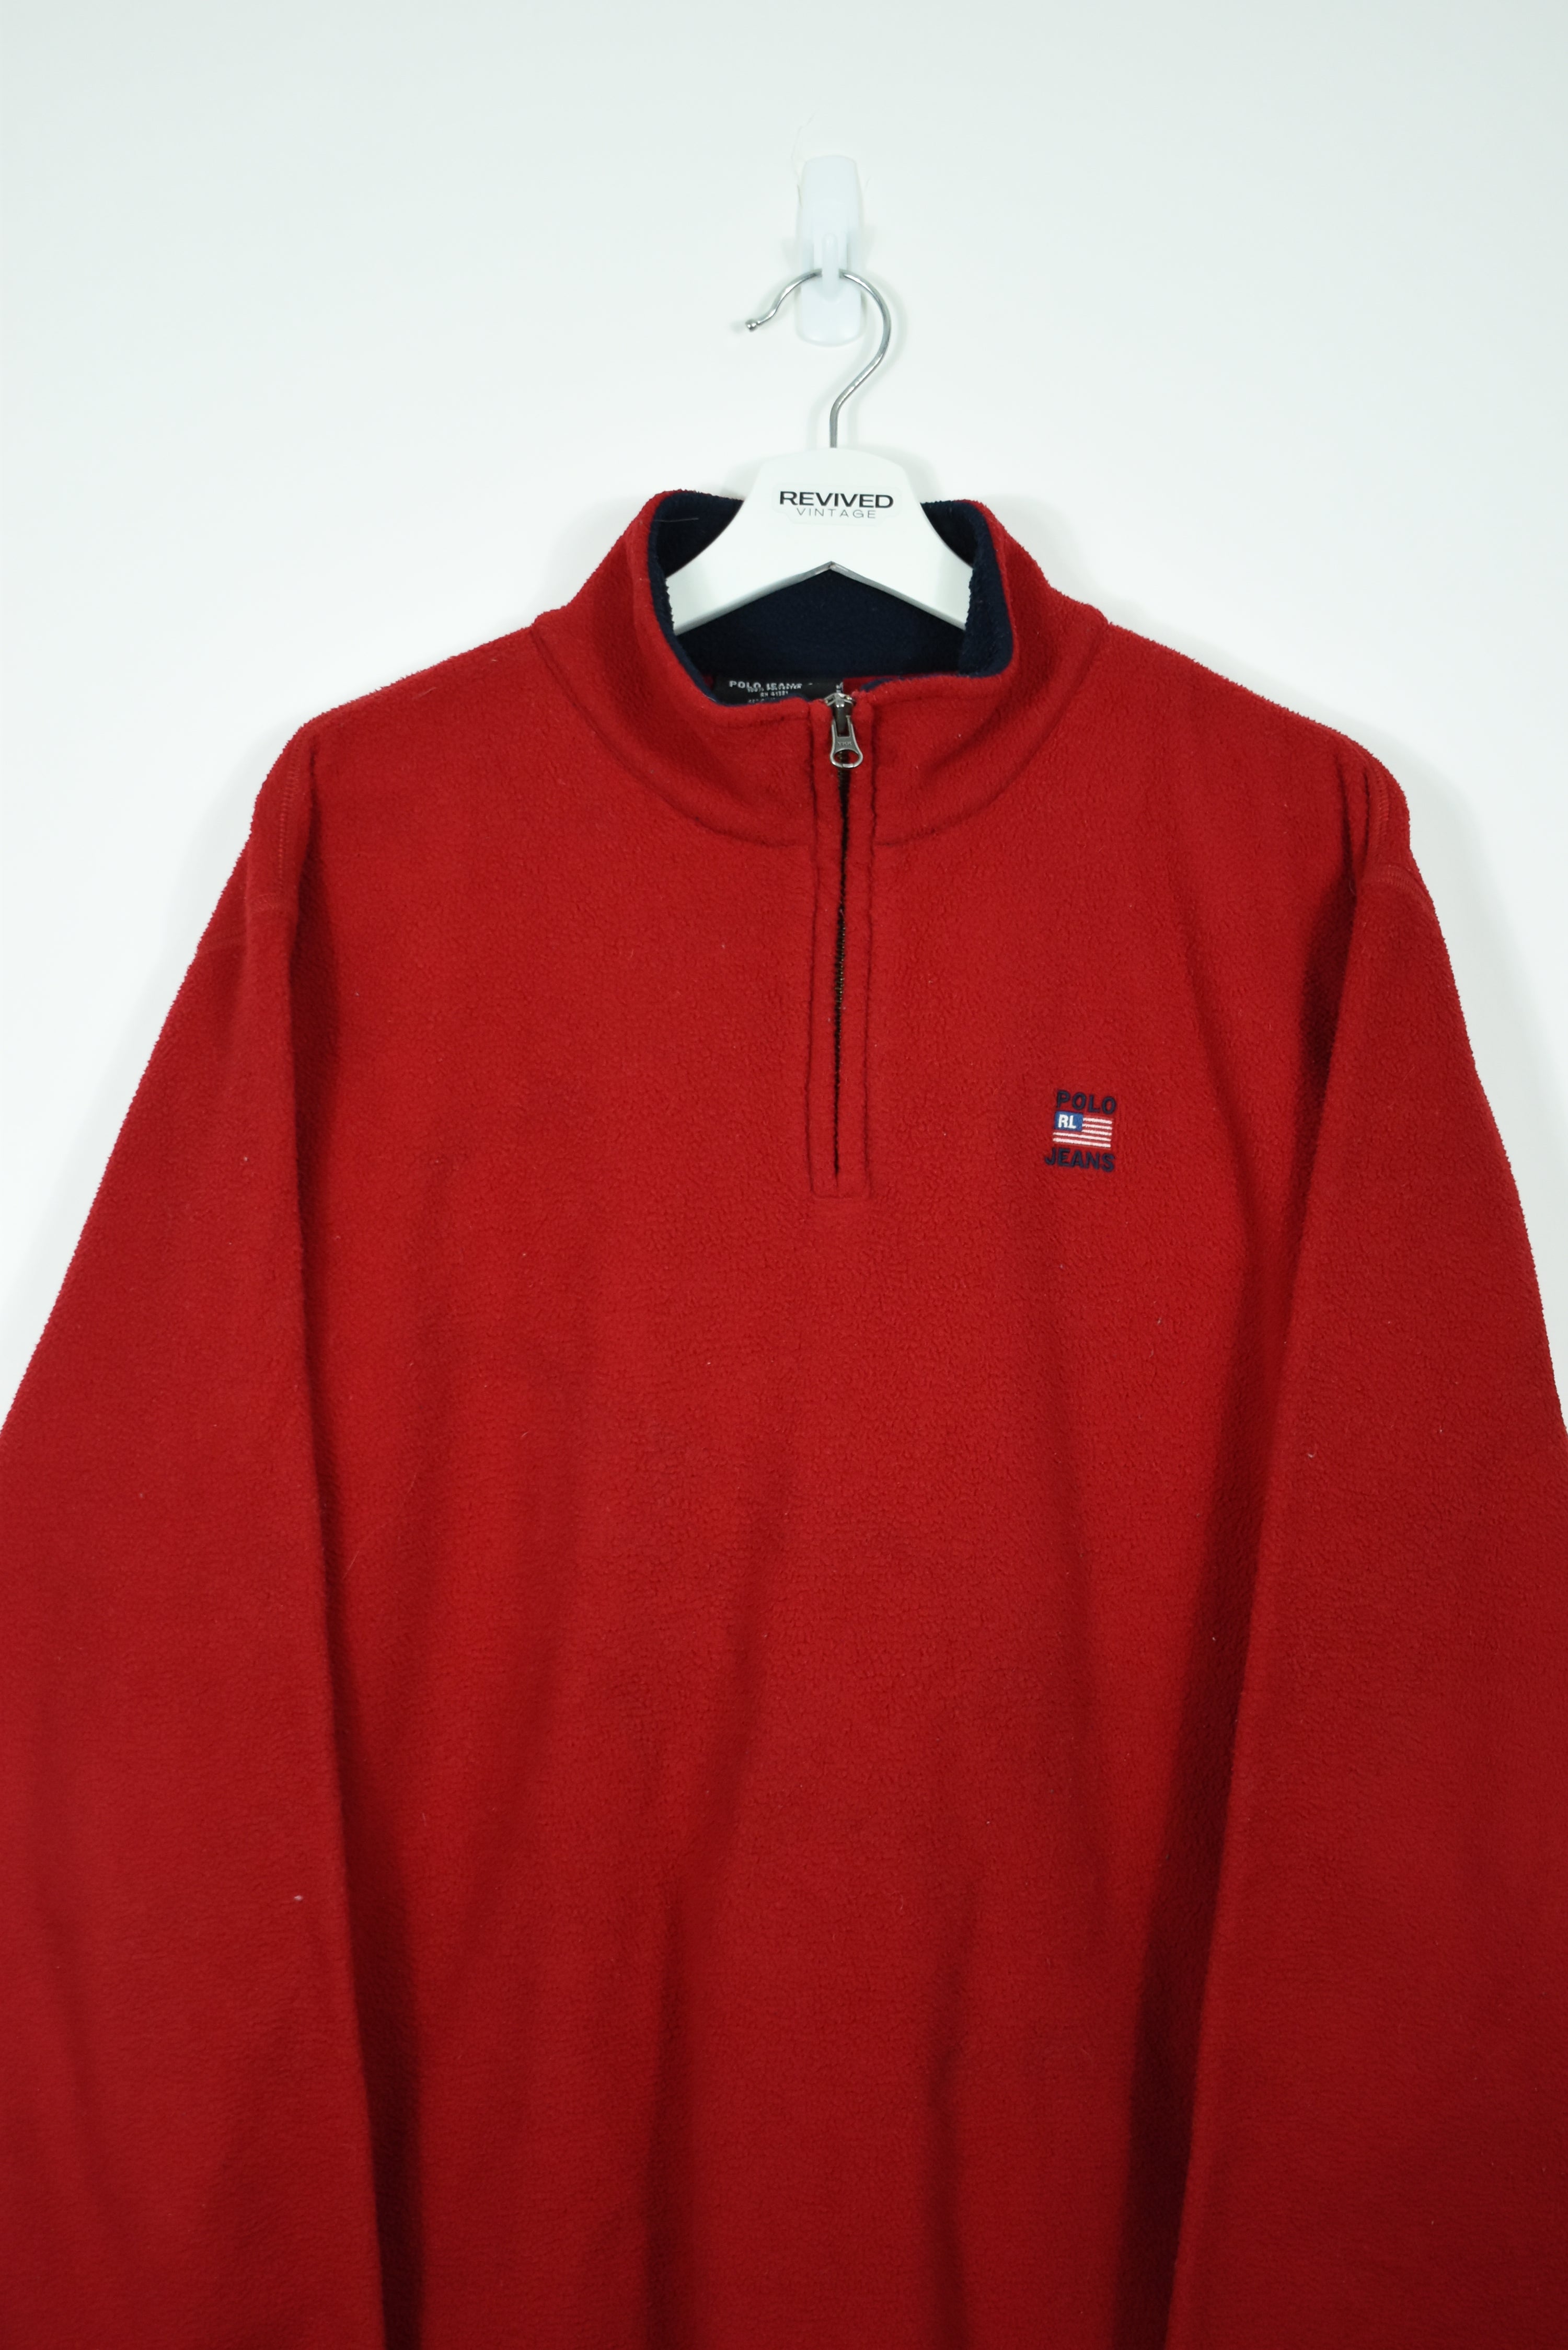 VINTAGE POLO RL EMBROIDERY RED 1/4 ZIP FLEECE LARGE (BAGGY)